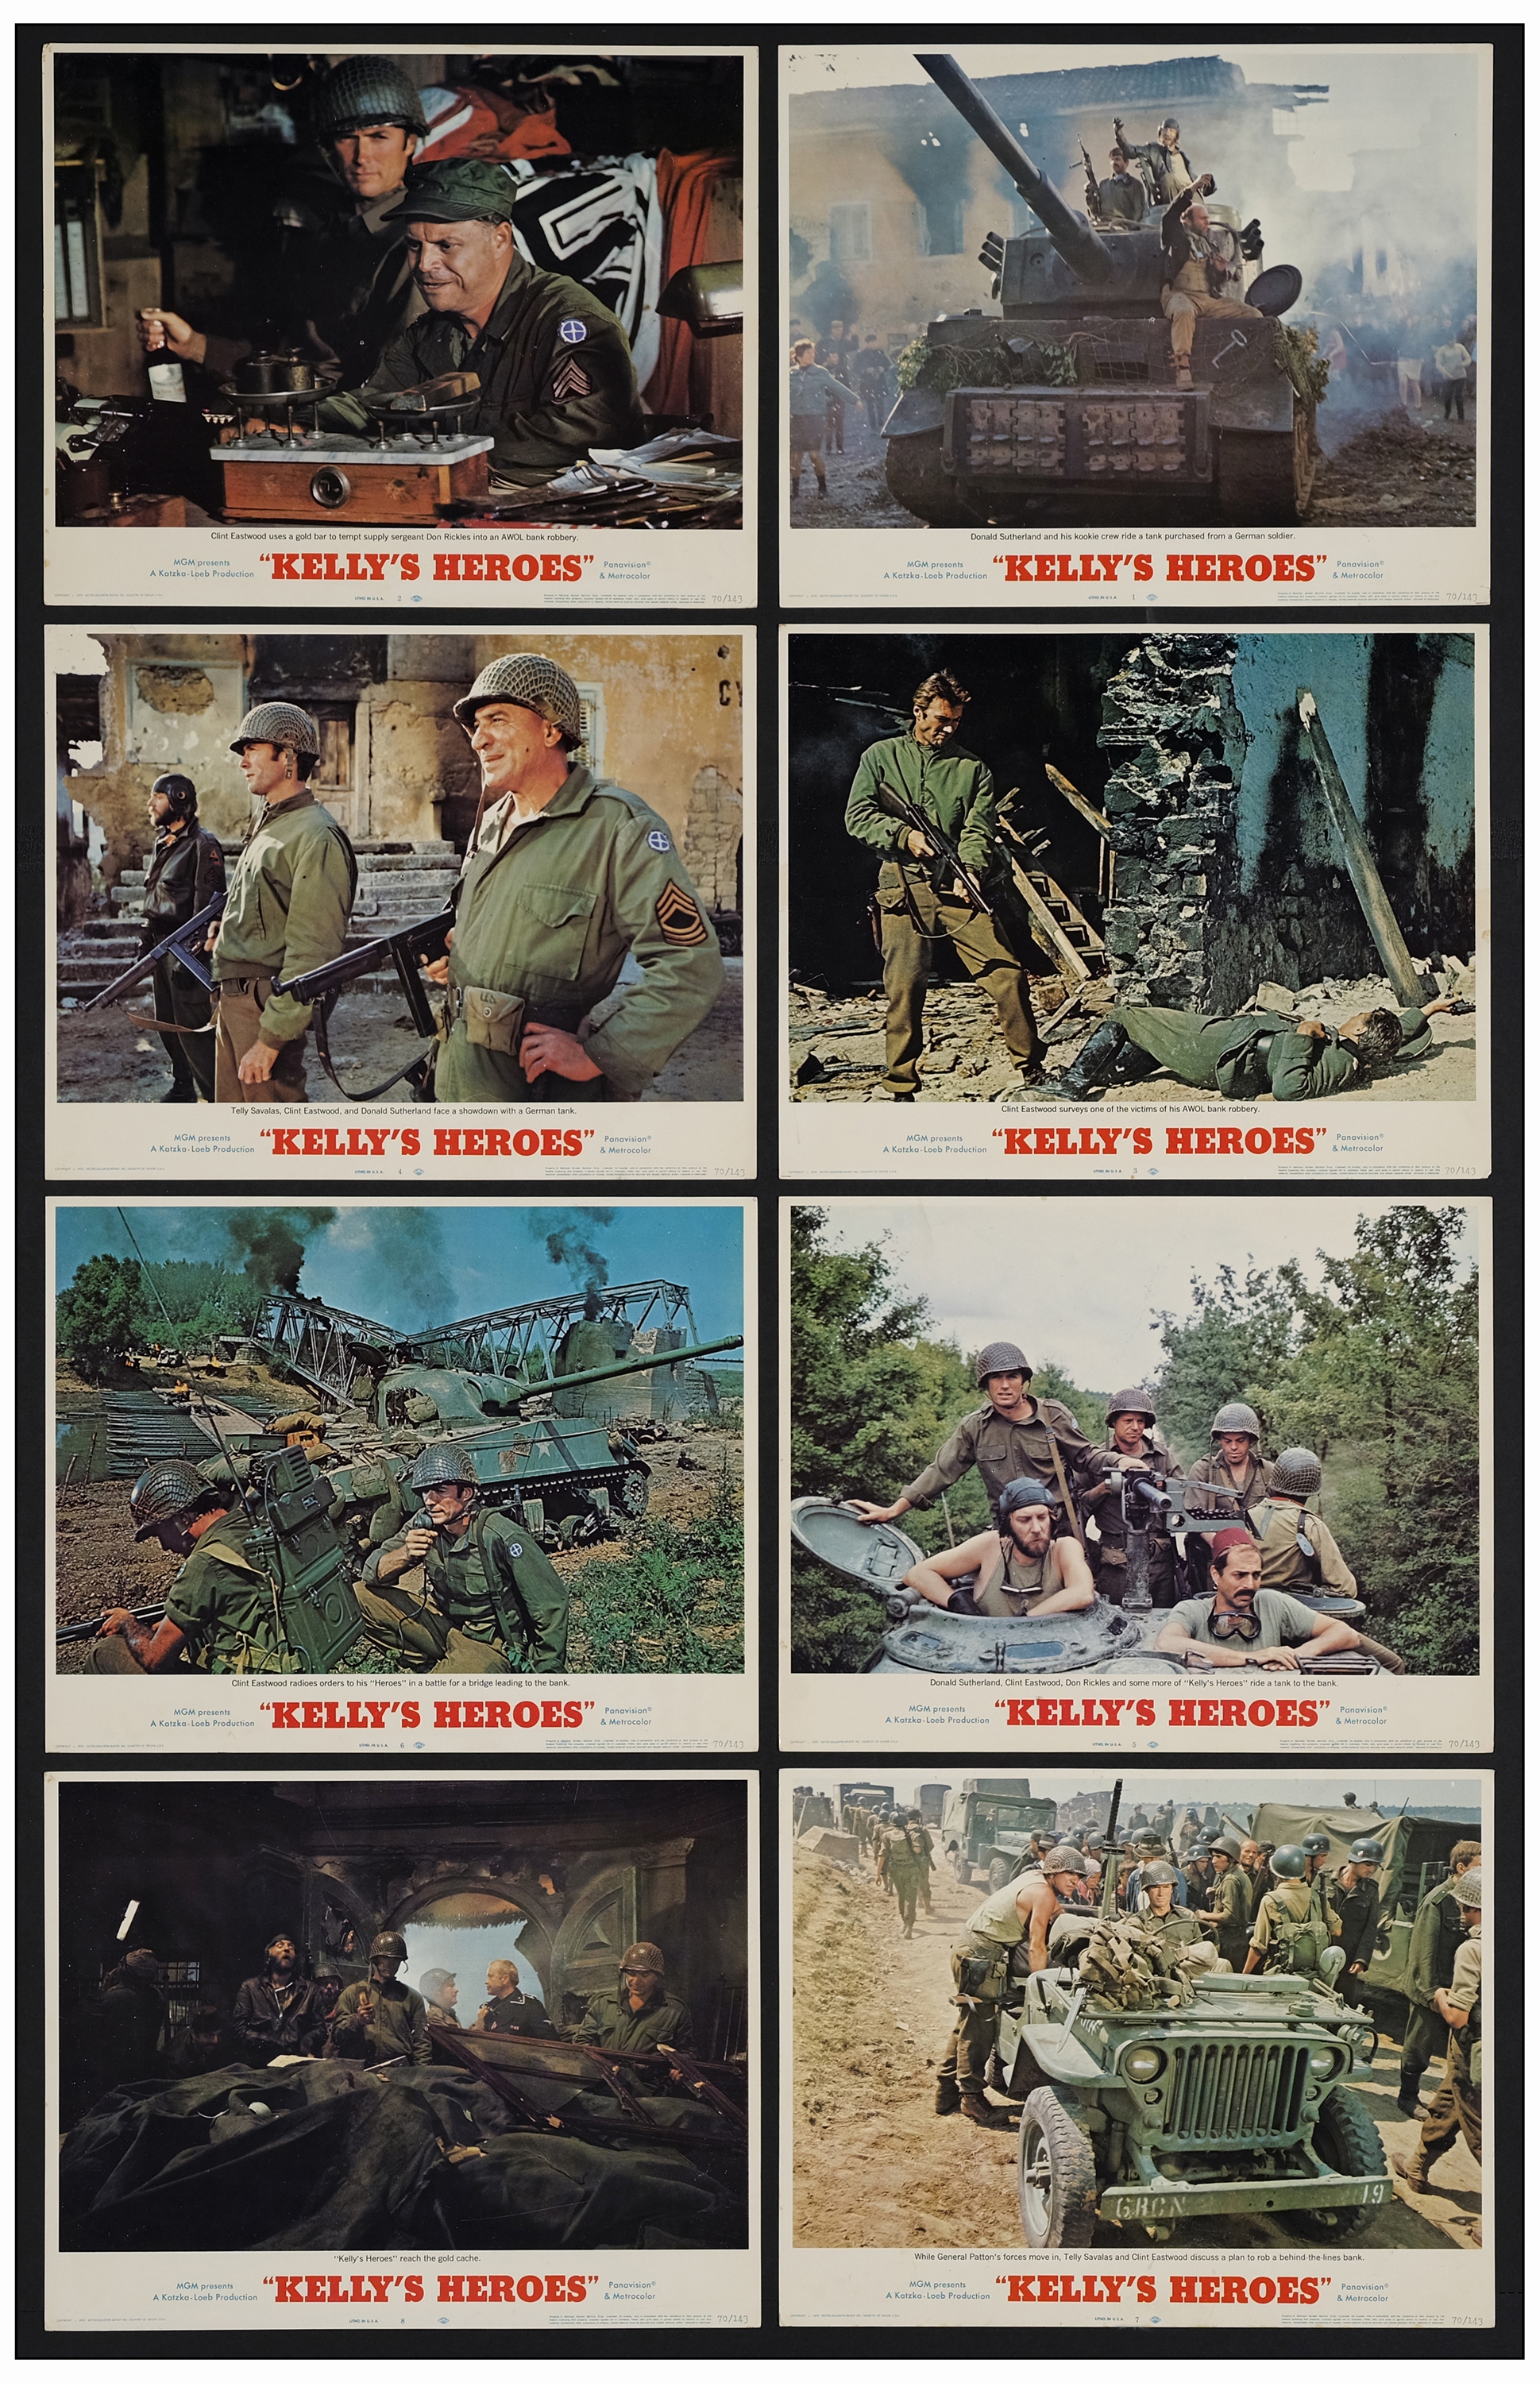 THE DIRTY DOZEN - Lobby Card Set of (8), Two Full Sets (11" x 14" ); Very Fine- - Image 3 of 3